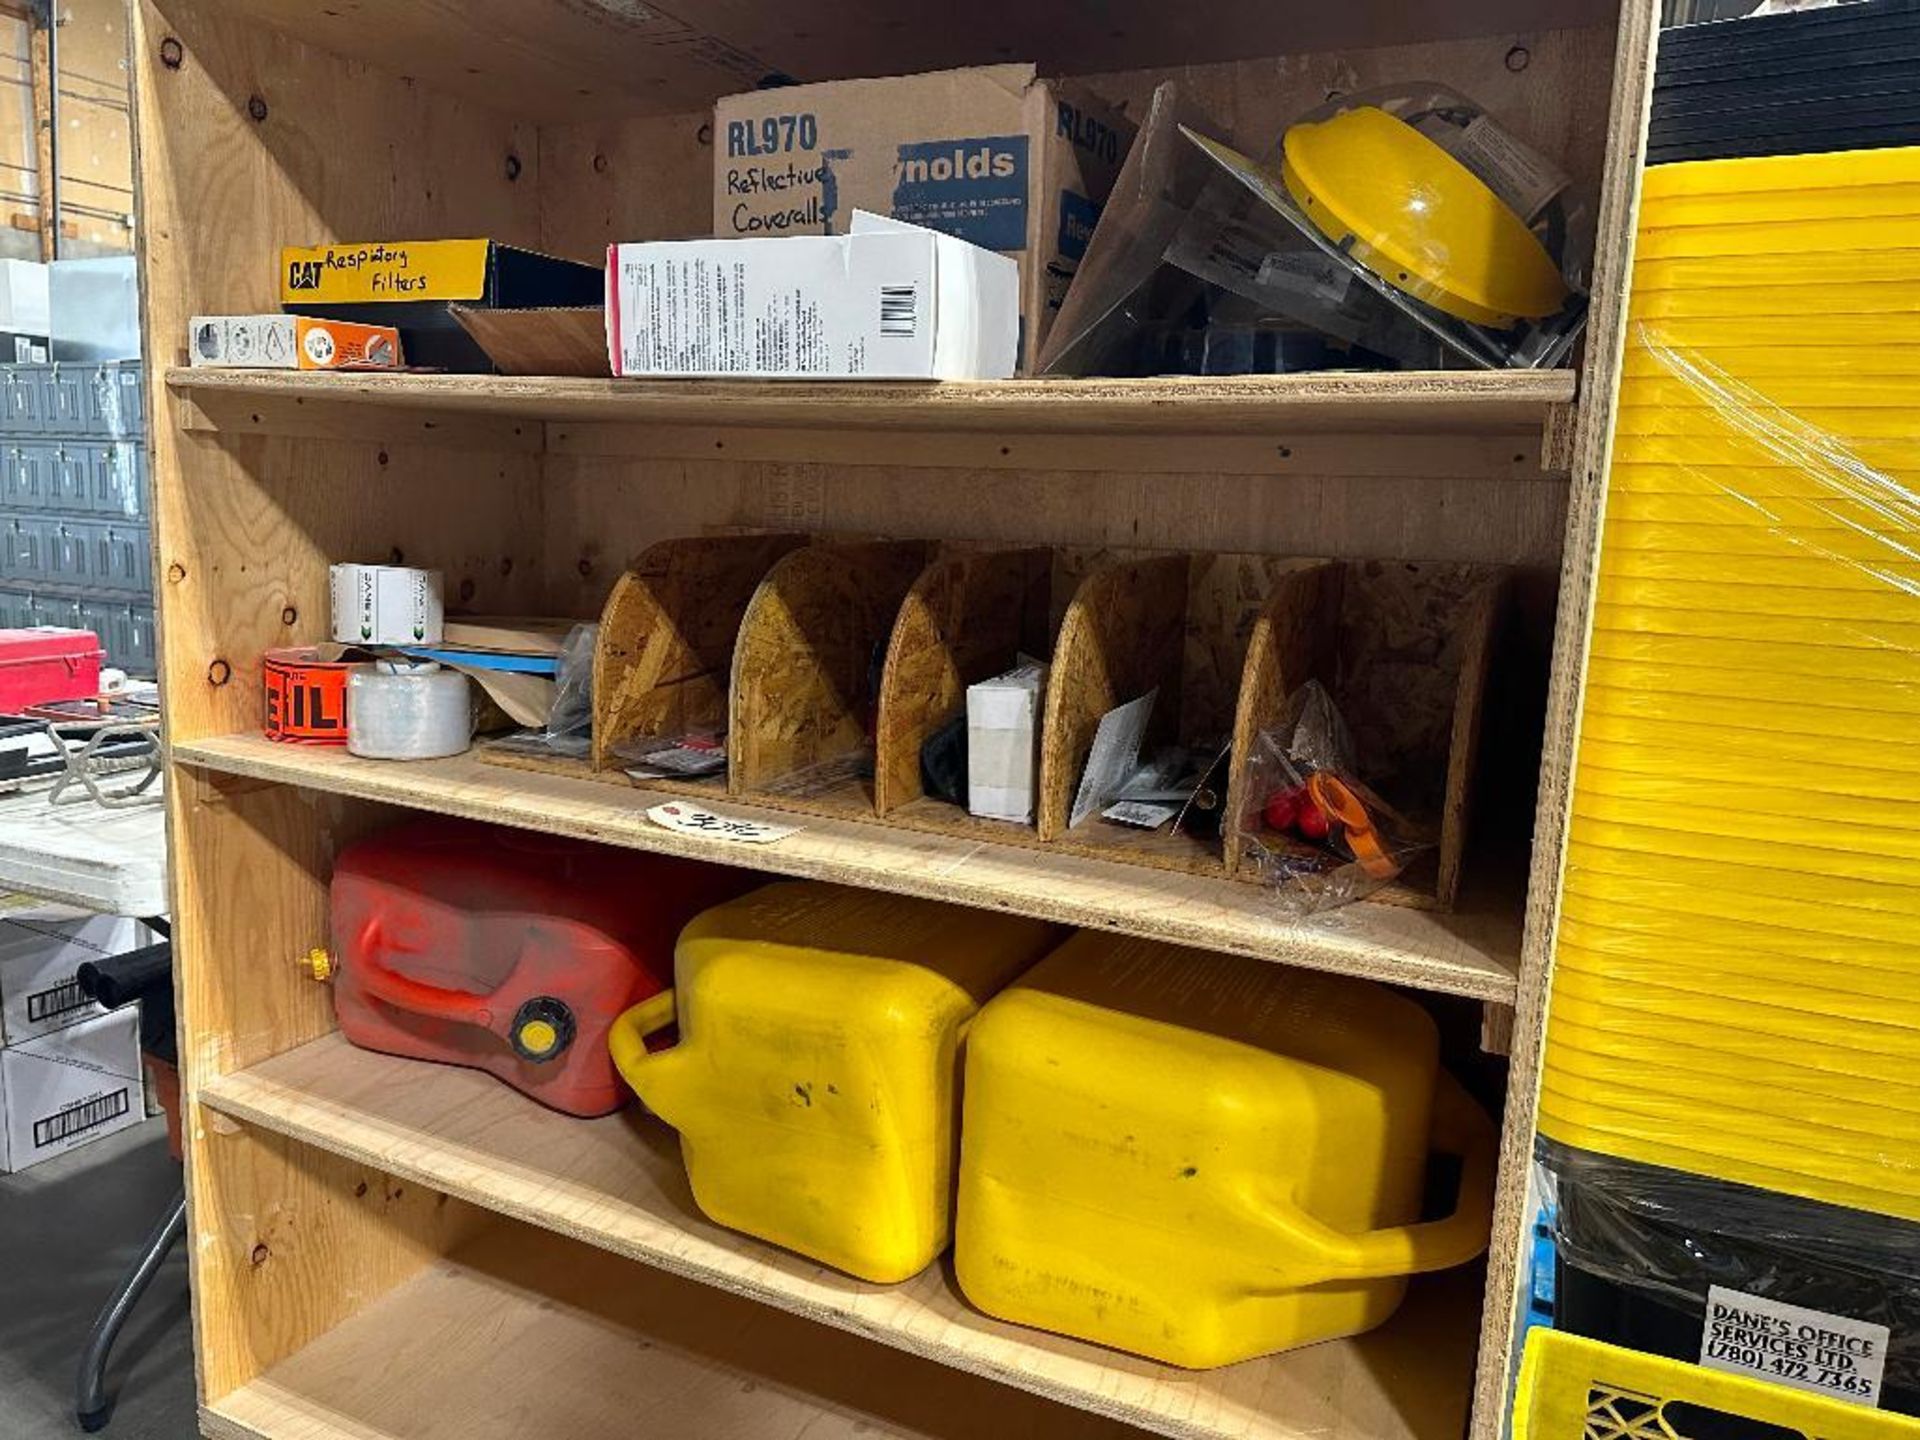 Contents of Wooden Shelf including Fuel Cans, Face Shield Headgear, Straps, etc. - Image 4 of 4